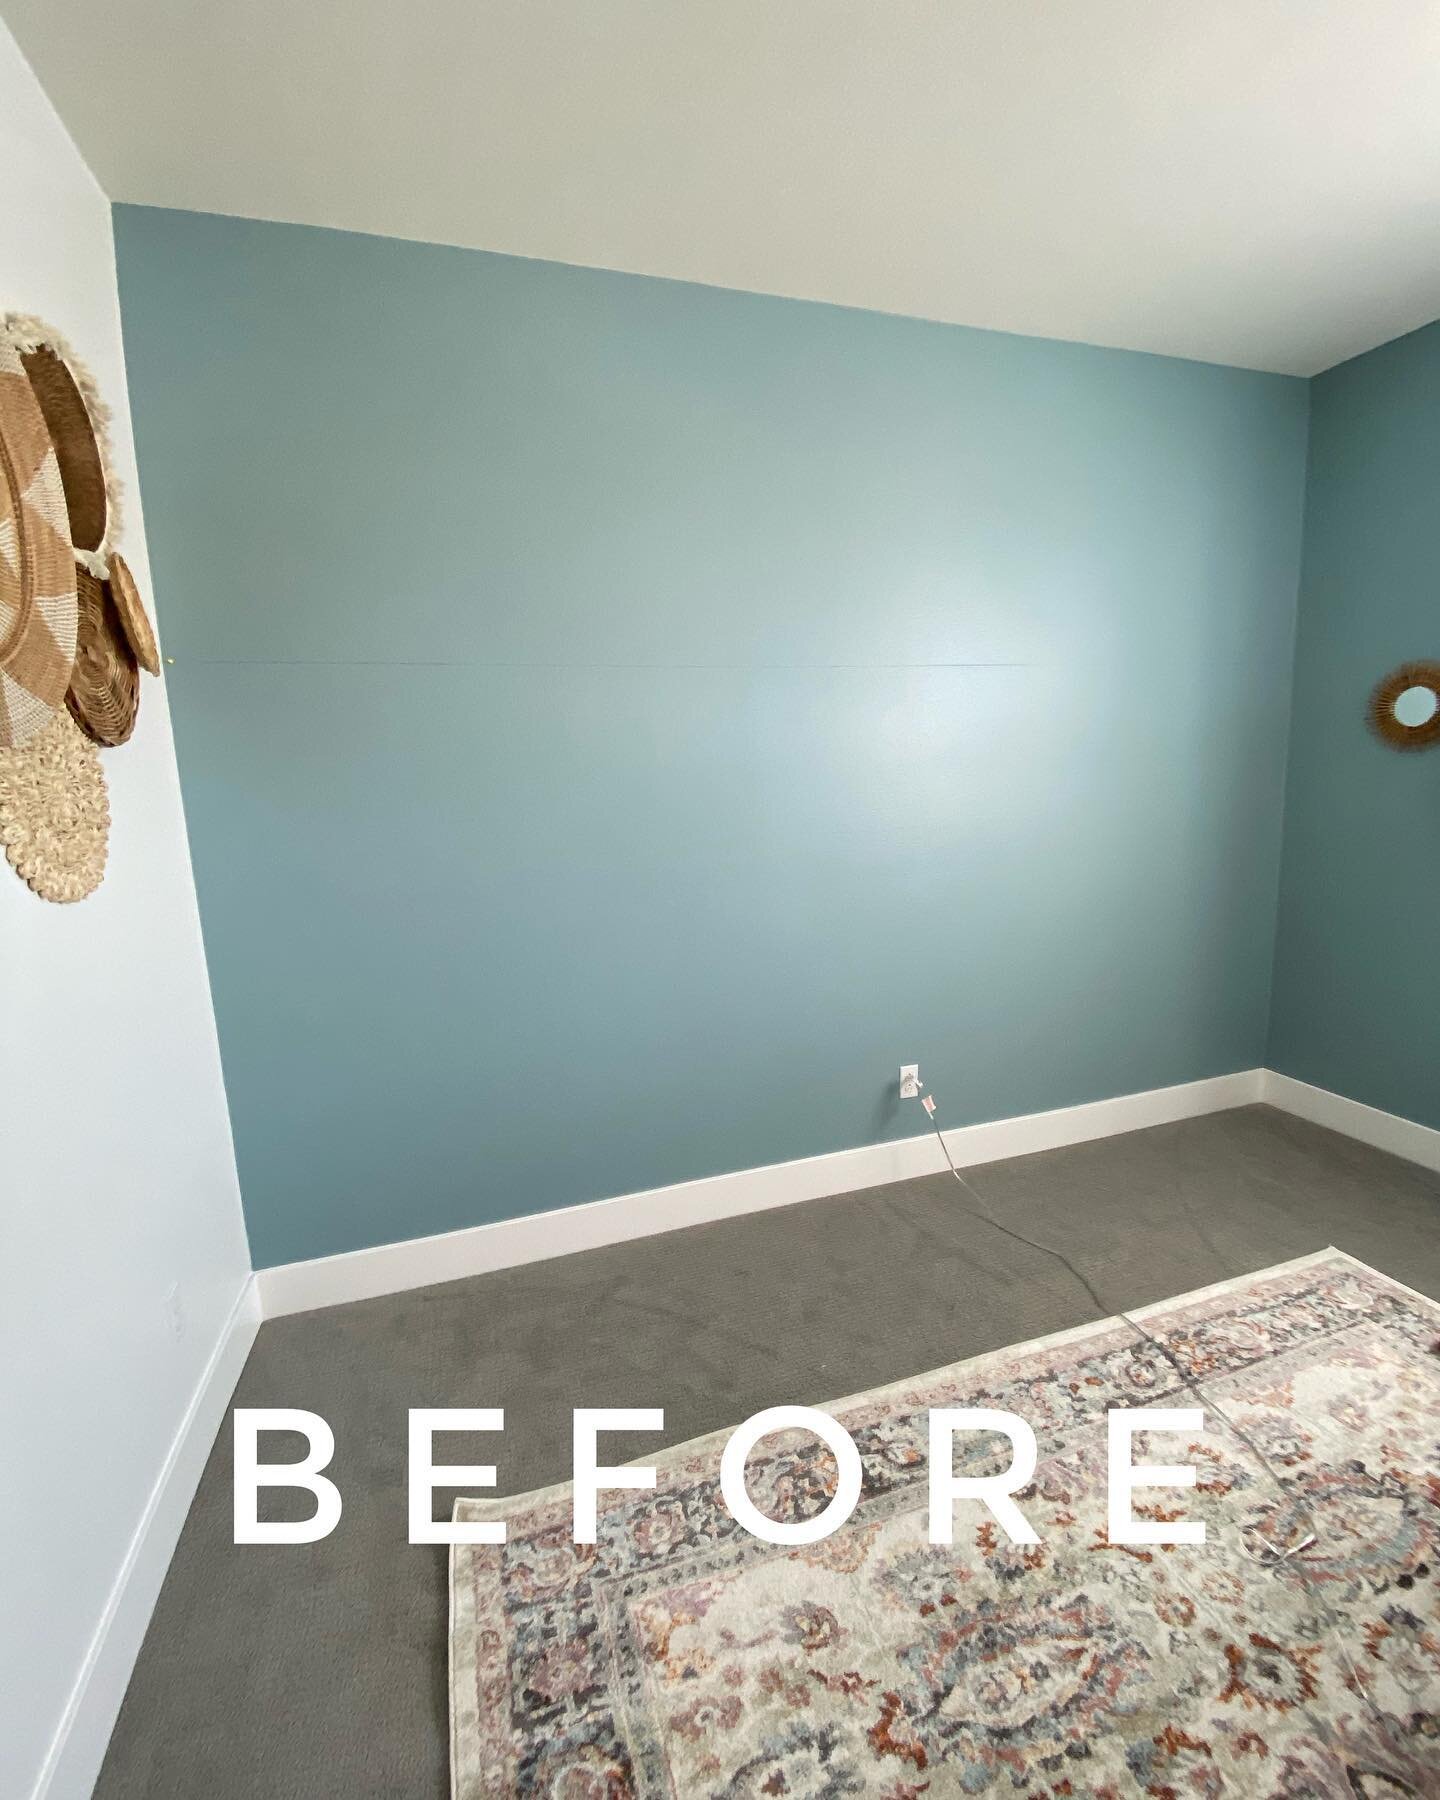 TRANSFORMATION TUESDAY!

This nursery transformation is mind blowing! 🤯🤯🤯

What do you think?? Comment below!

DM me for a FREE accent wall quote today!